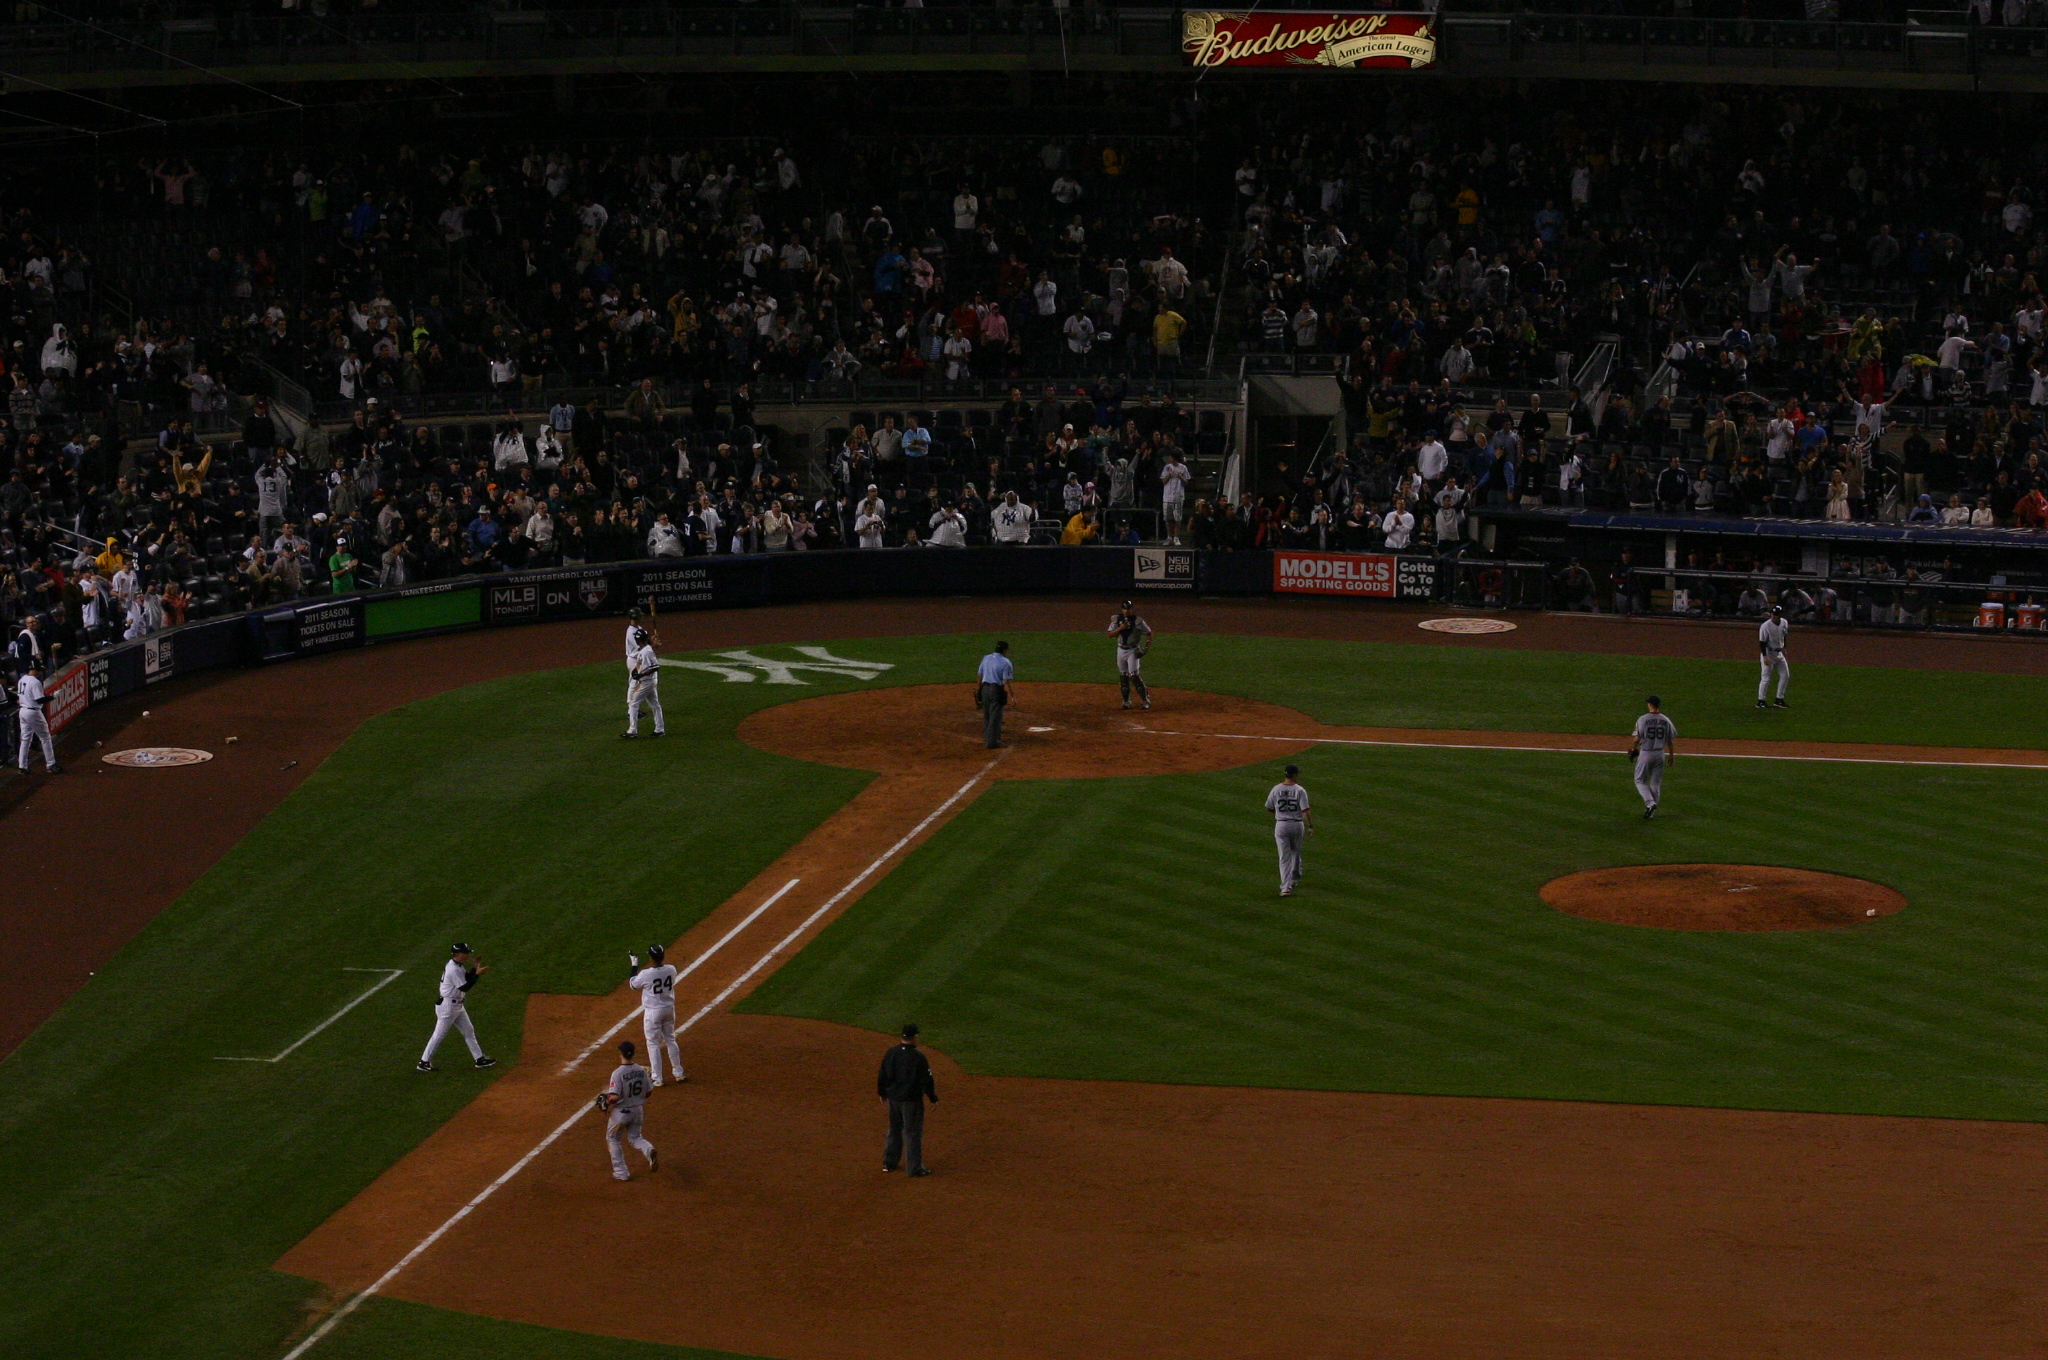 baseball players at home plate, with crowd in stands